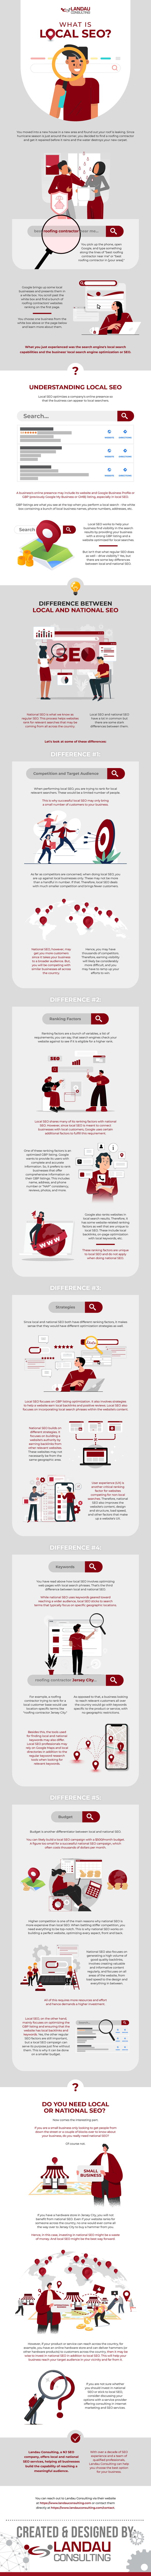 What-is-Local-SEO?-Infographic-Image